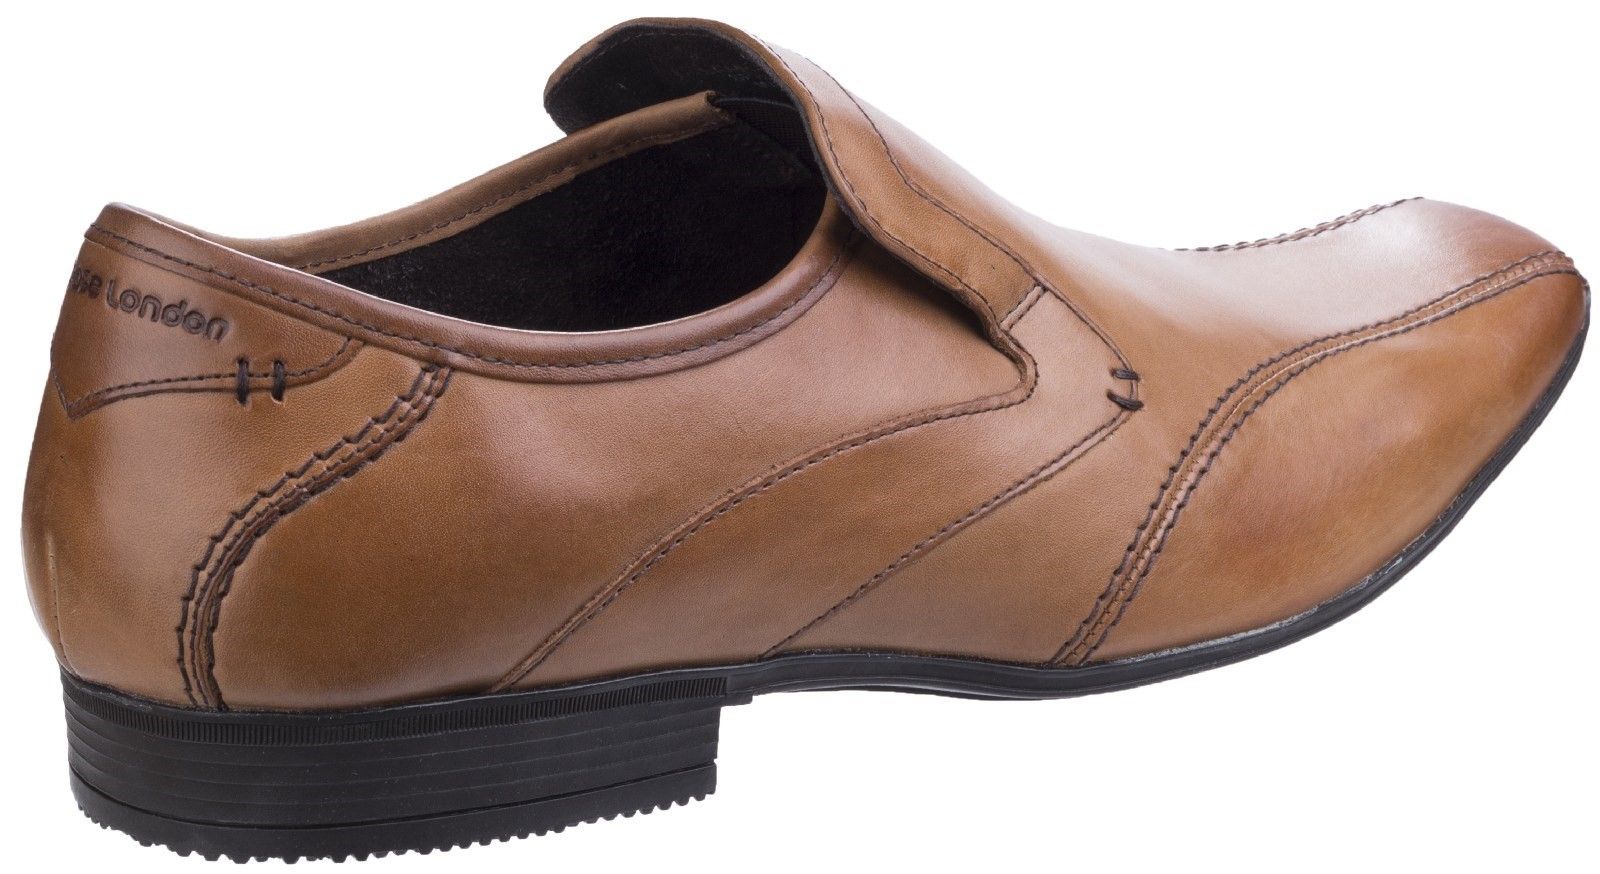 Sphere Excel from the Base London larger size mens shoe collection. Quality rich leather upper gives this loafer a traditionally smart look, whilst soft suede lining makes this shoe comfortable to wear. Designed for guys blessed with bigger feet. High quality leather uppers give a smart and sophisticated look. 
Quality suede lining provides added comfort with a soft touch. 
Rubber sole provides added grip to give a secure step.